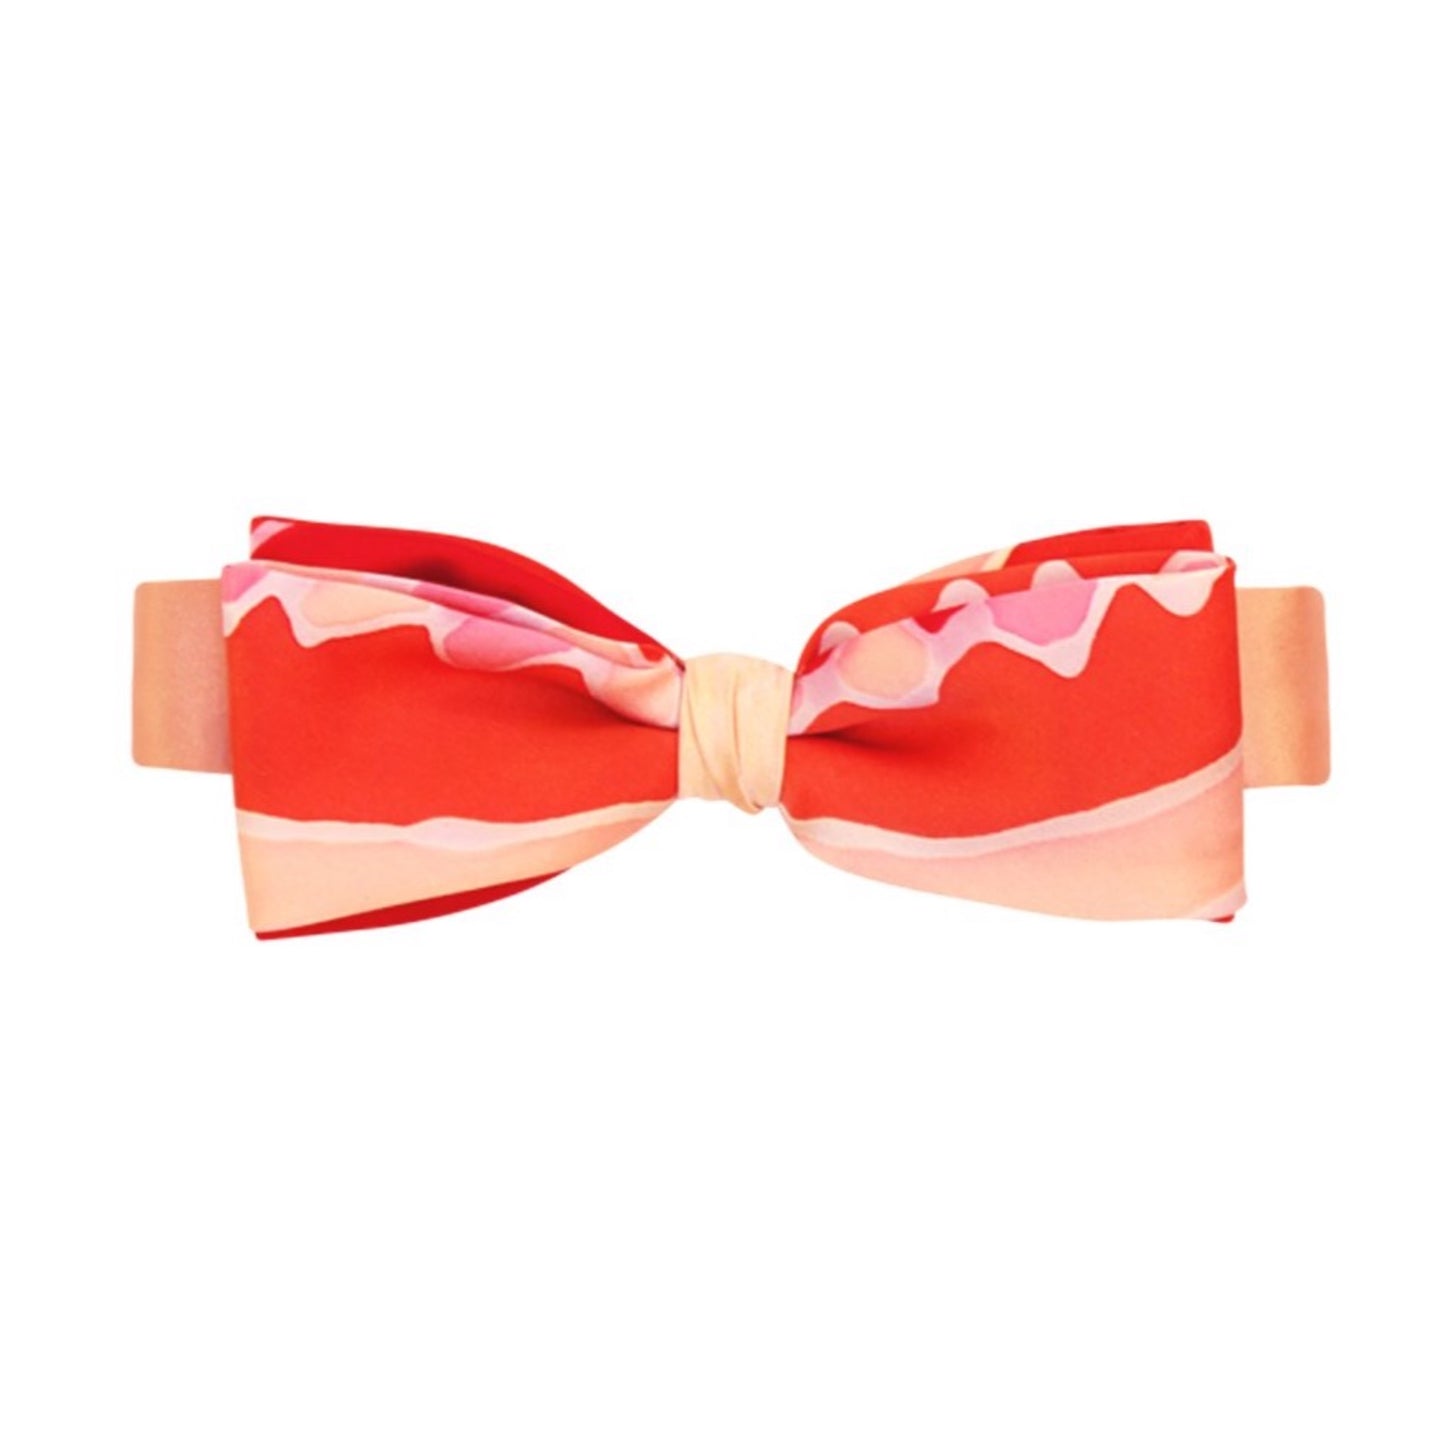 coral dusty rose ivory hand painted pre tied bow tie by German Valdivia 